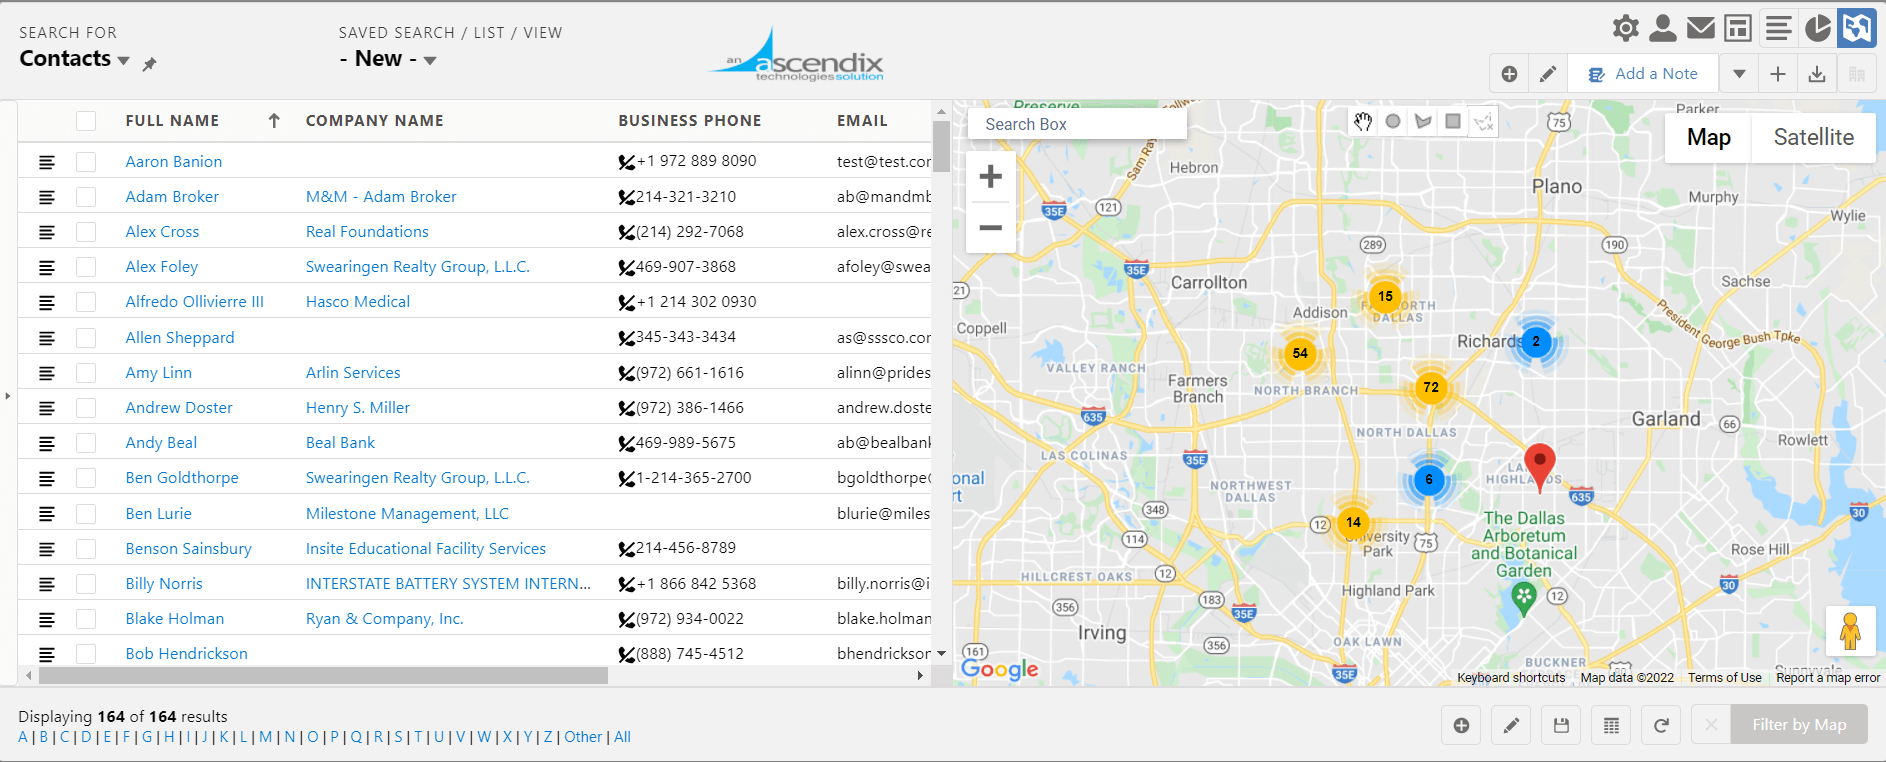 Salesforce radius search for Contacts within 5 miles from selected company